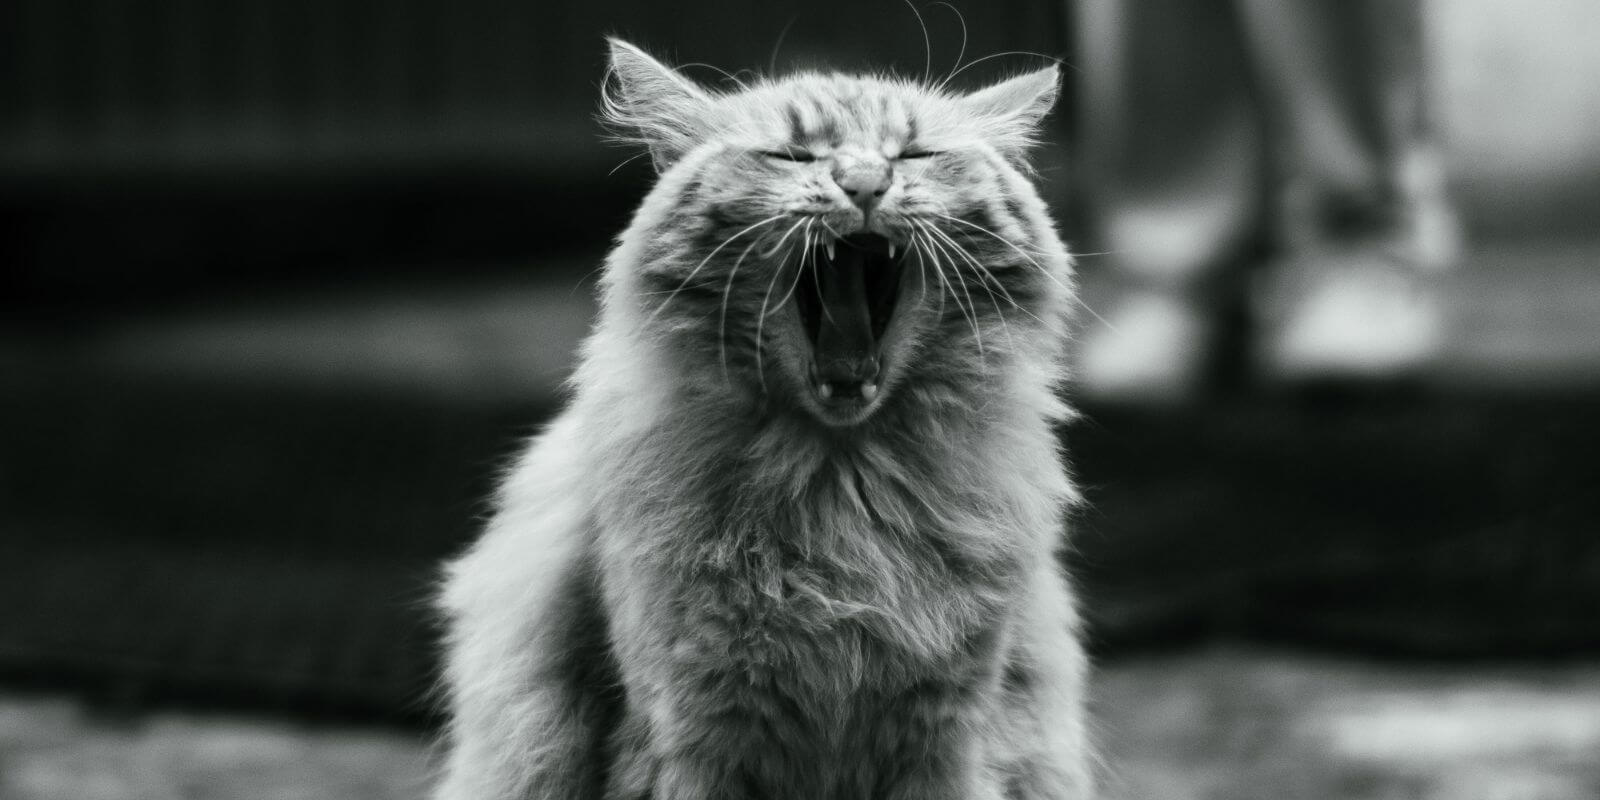 Black and white photo of long-haired cat sneezing